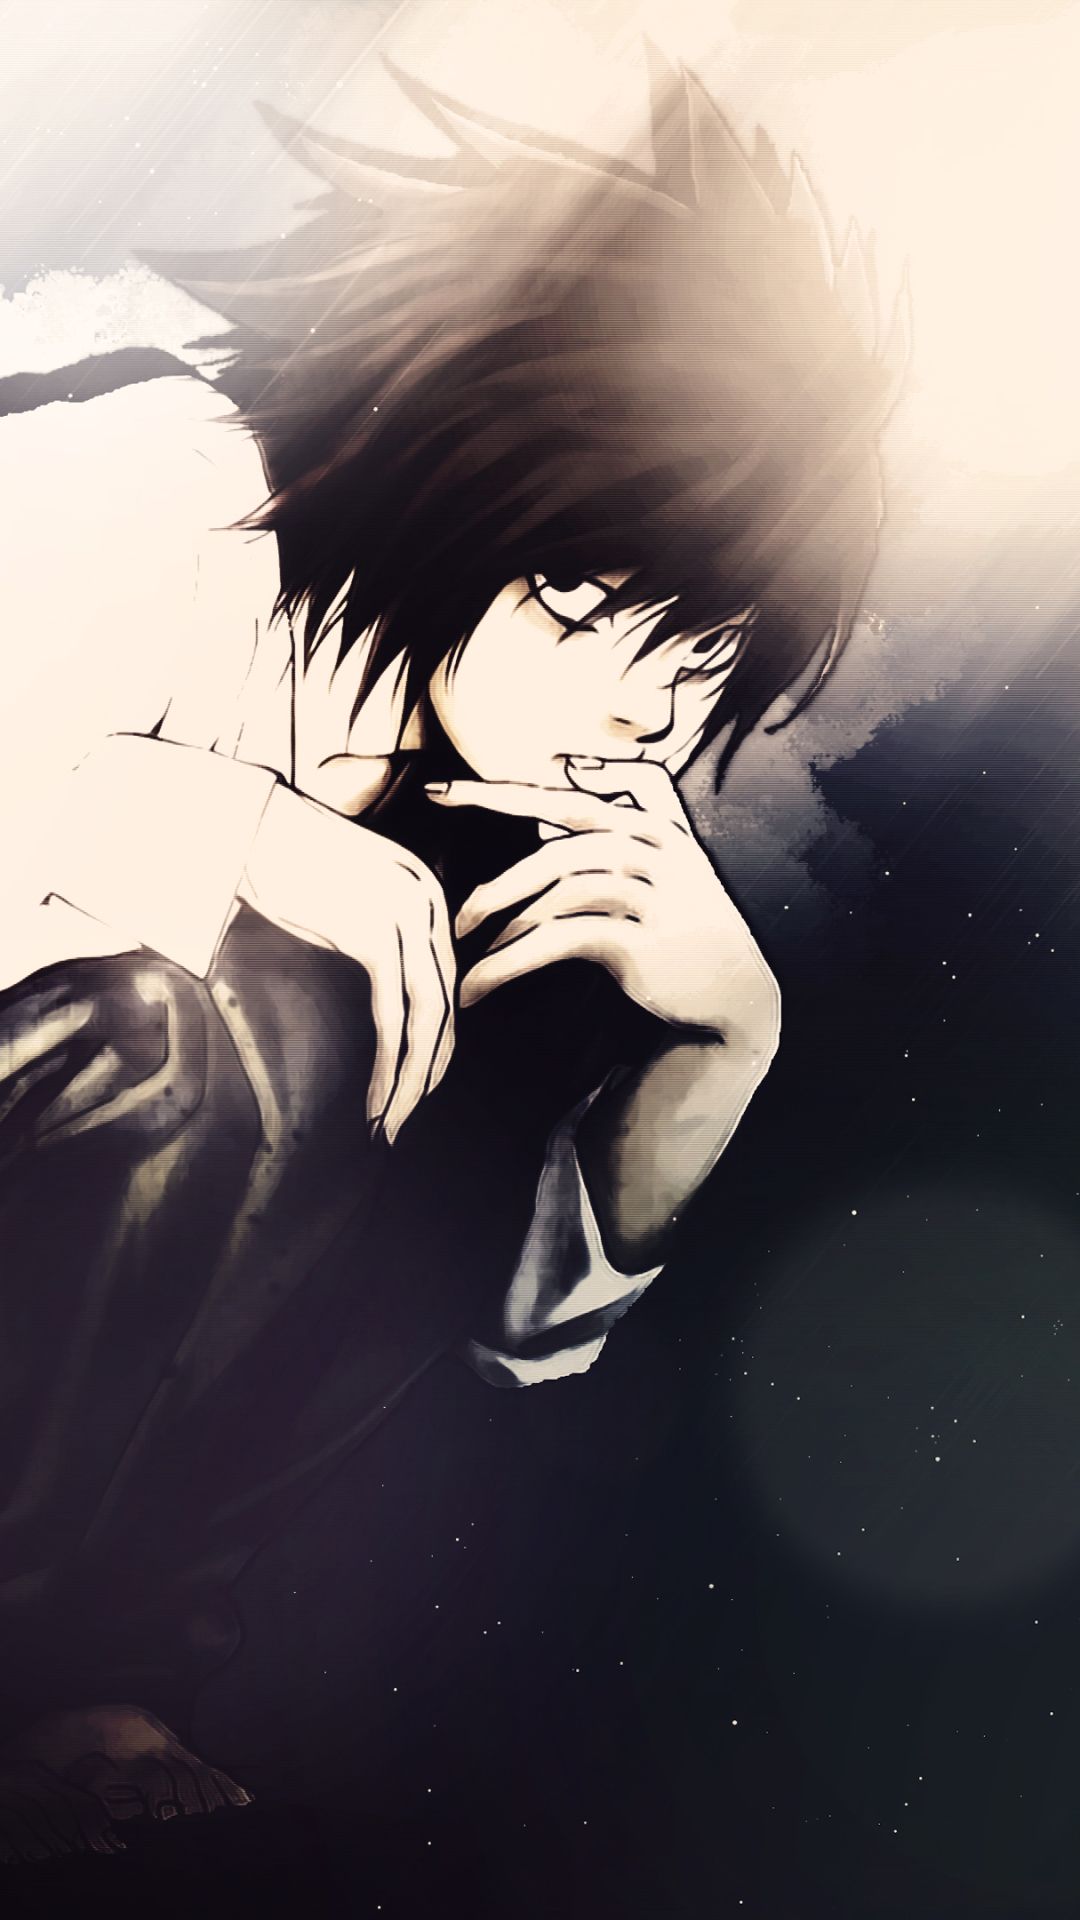 Anime Death Note Full Hd 1080x1920 Wallpapers Wallpaper Cave Mobile abyss anime death note. anime death note full hd 1080x1920